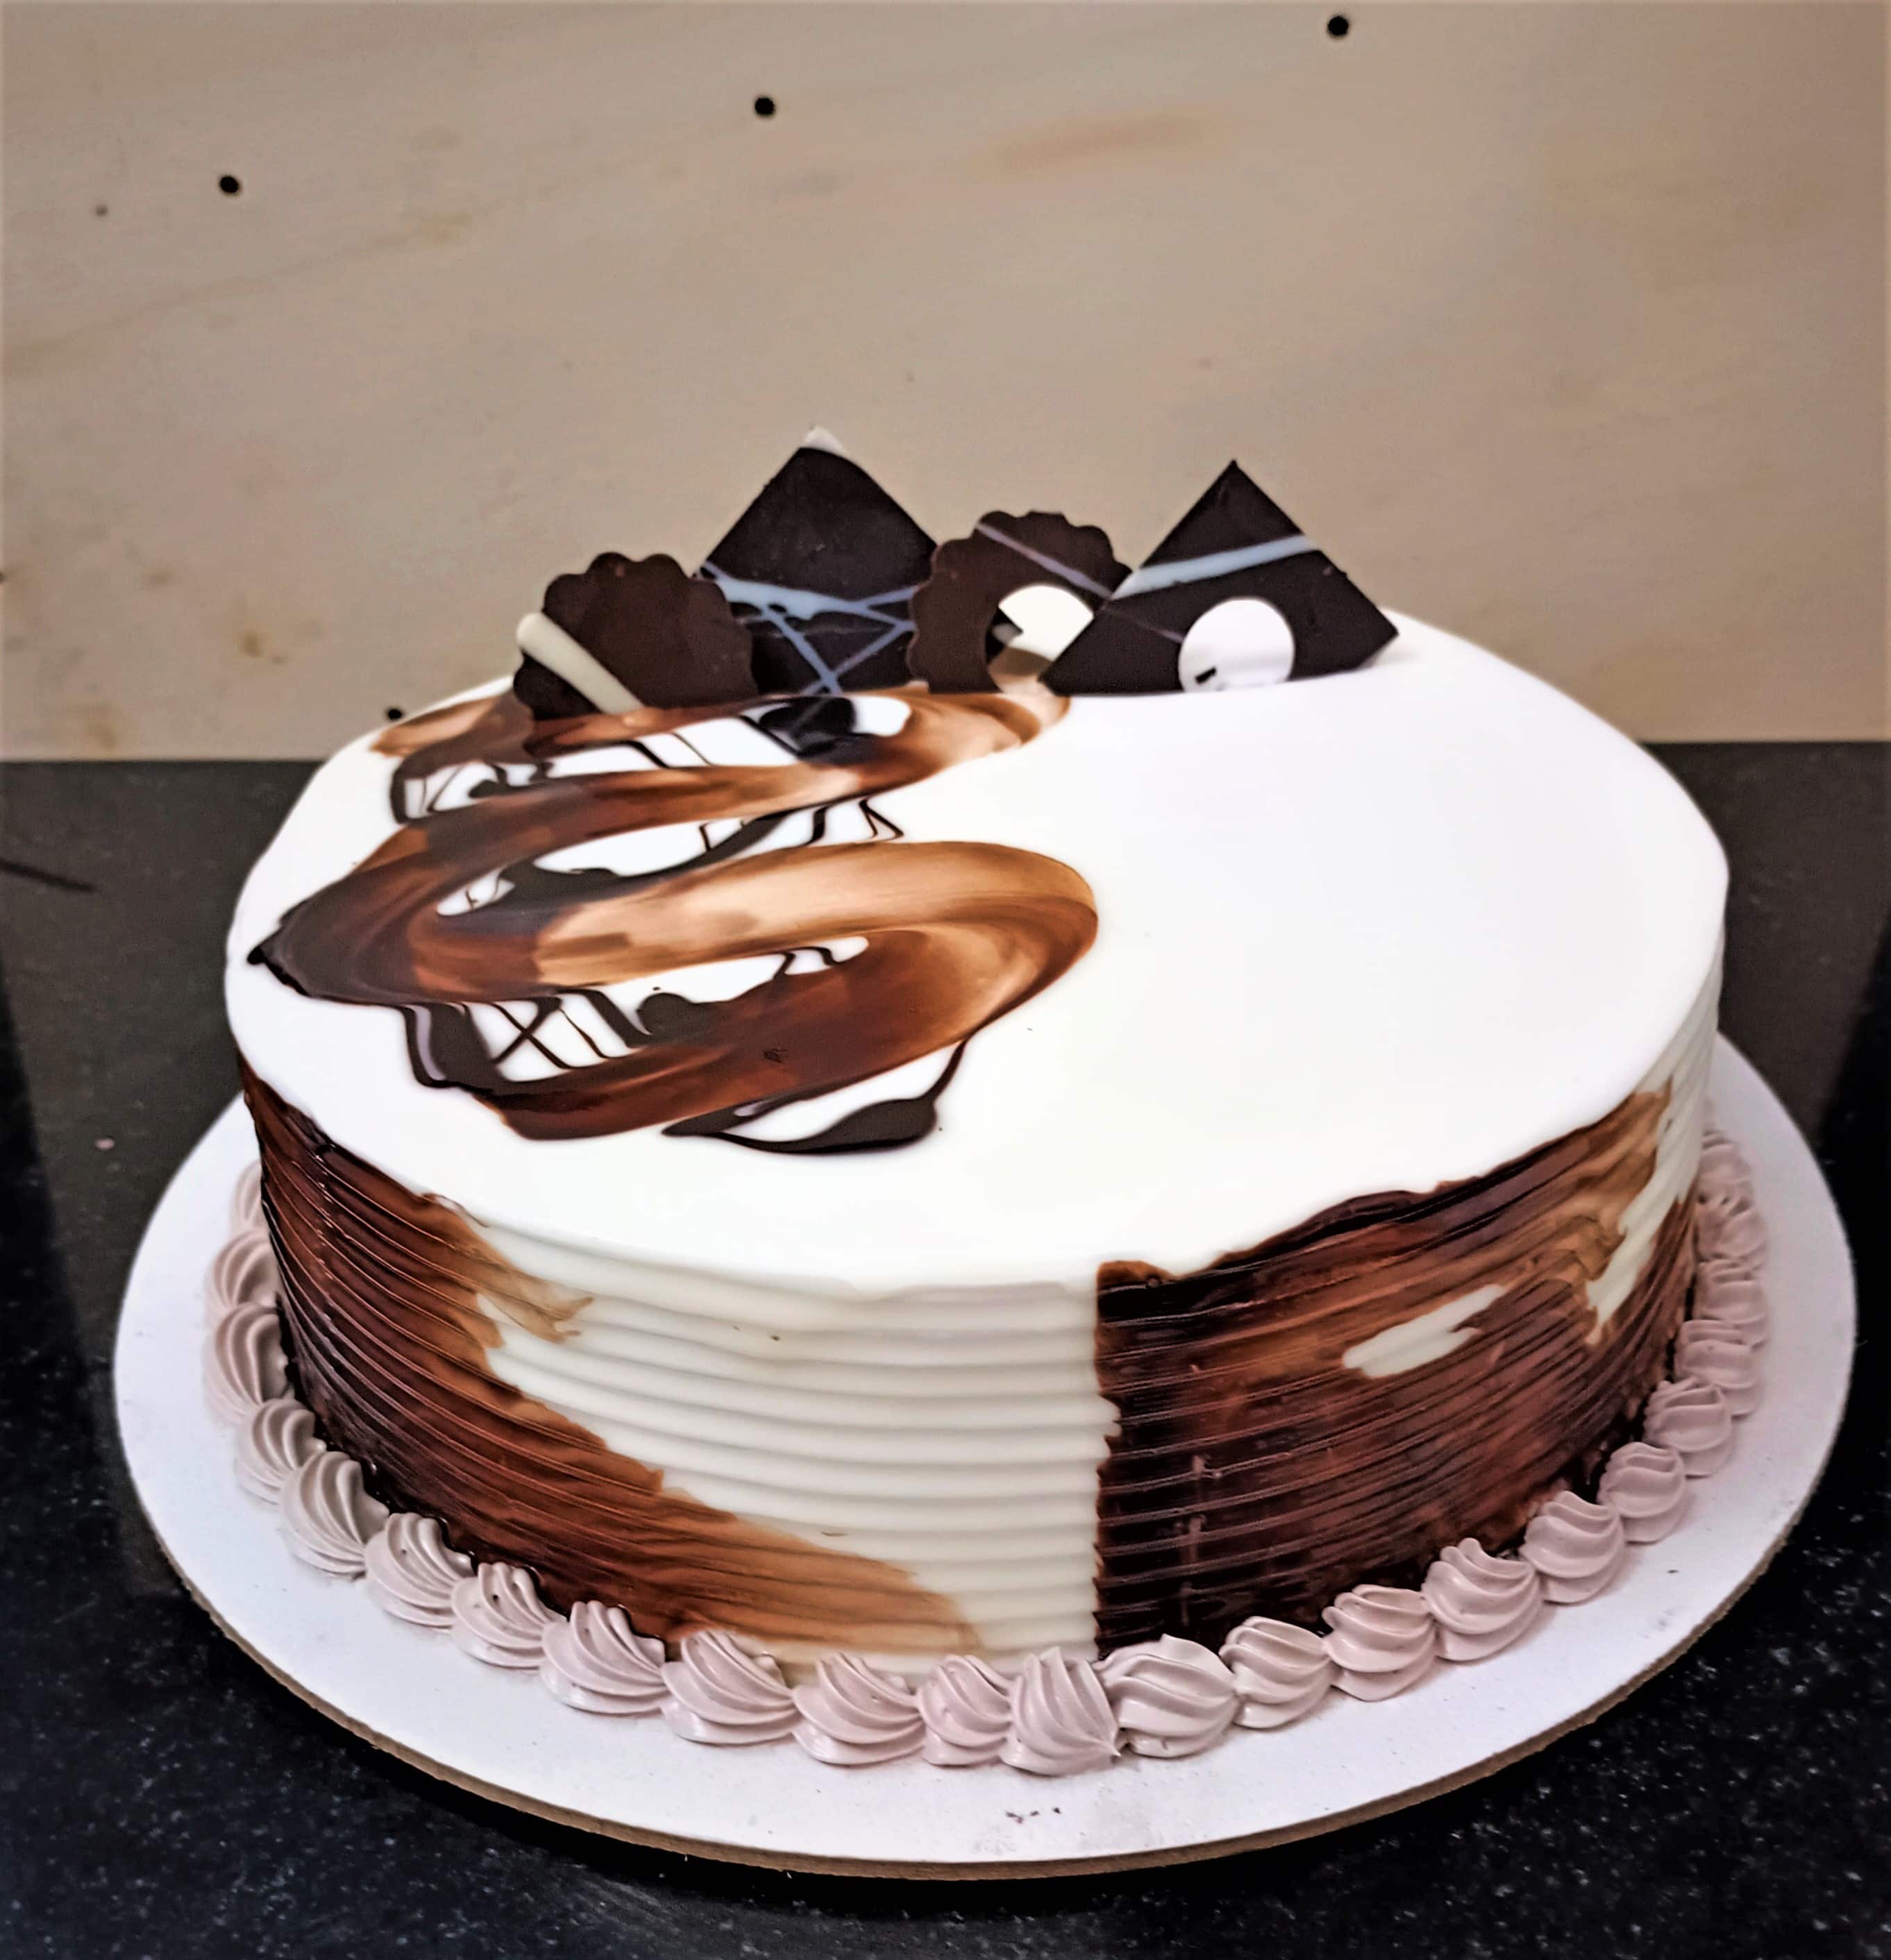 𝐕𝐚𝐧𝐜𝐡𝐨 𝐕𝐚𝐧𝐢𝐥𝐥𝐚 𝐂𝐡𝐨𝐜𝐨𝐥𝐚𝐭𝐞 🍫 𝐂𝐚𝐤𝐞 Vancho Vanilla  Cake Is Awesome 😋 Combination Of Chocolate And Vanilla Cake Topped With  White And Dark Chocolate Ganache.... | By Just BakeFacebook